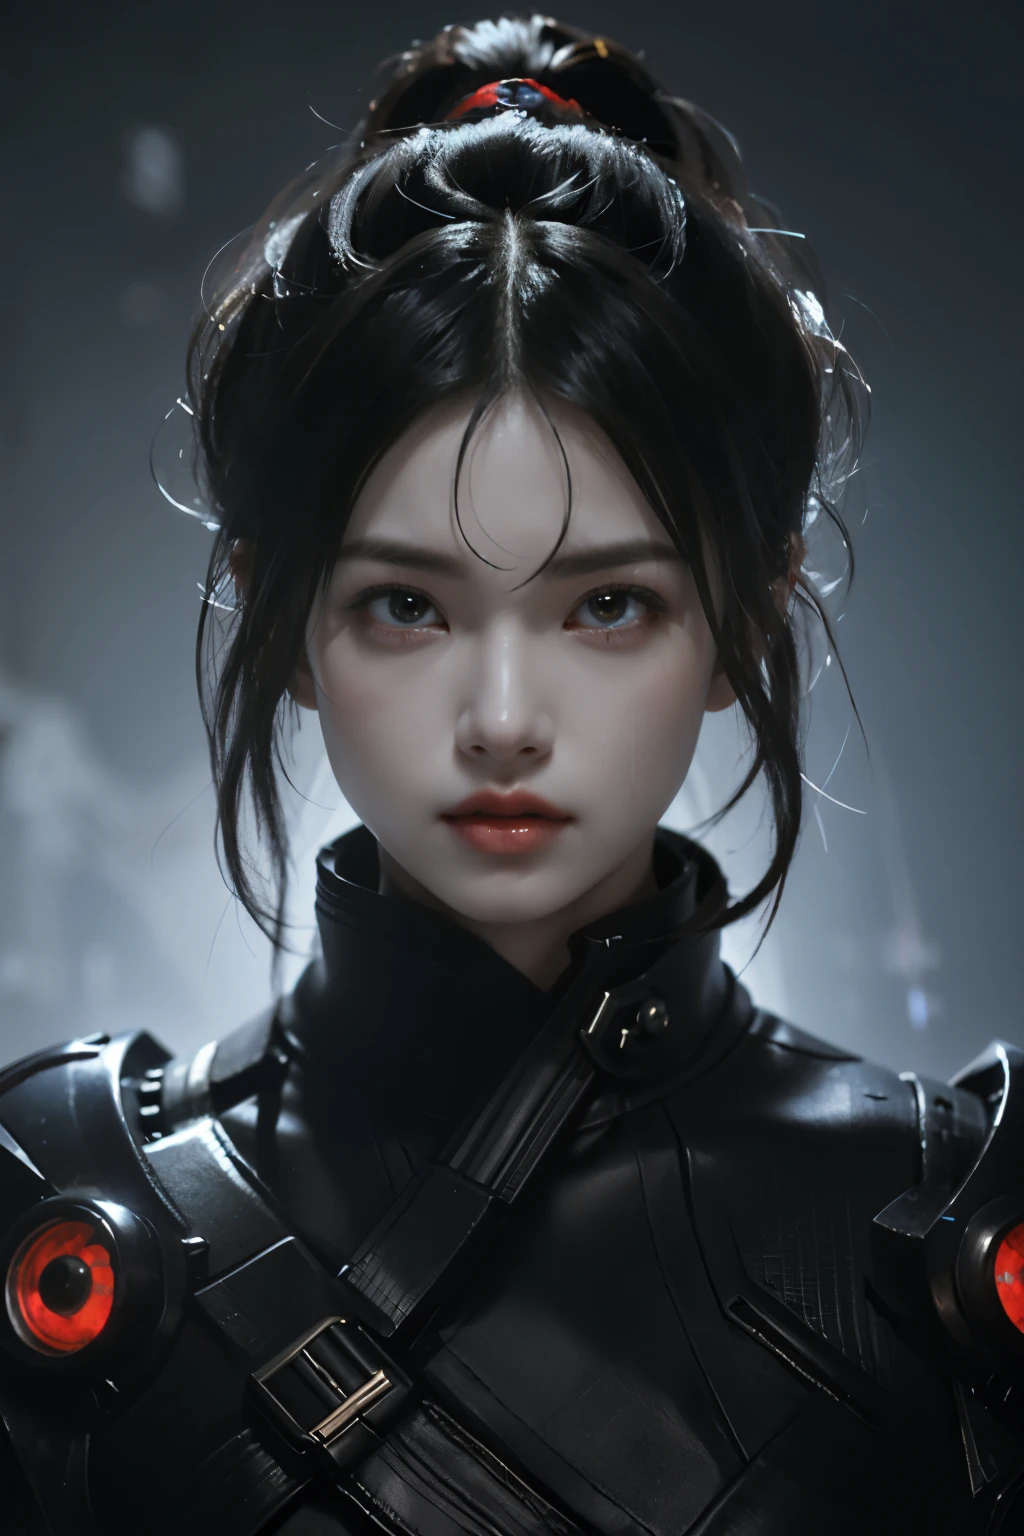 Game art，The best picture quality，Highest resolution，8K，((A bust photograph))，((Portrait))，((Head close-up))，(Rule of thirds)，Unreal Engine 5 rendering works， (The Girl of the Future)，(Female Warrior)， 22-year-old girl，(Female hackers)，(Rainbow hair，Ancient Oriental hairstyle)，((The pupils of the red eyes:1.3))，(A beautiful eye full of detail)，(Big breasts)，(Eye shadow)，Elegant and charming，indifferent，((Anger))，(Cyberpunk jacket full of futuristic look，Joint Armor，There are exquisite Chinese patterns on the clothes，A flash of jewellery)，Cyberpunk Characters，Future Style， Photo poses，City background，Movie lights，Ray tracing，Game CG，((3D Unreal Engine))，oc rendering reflection pattern